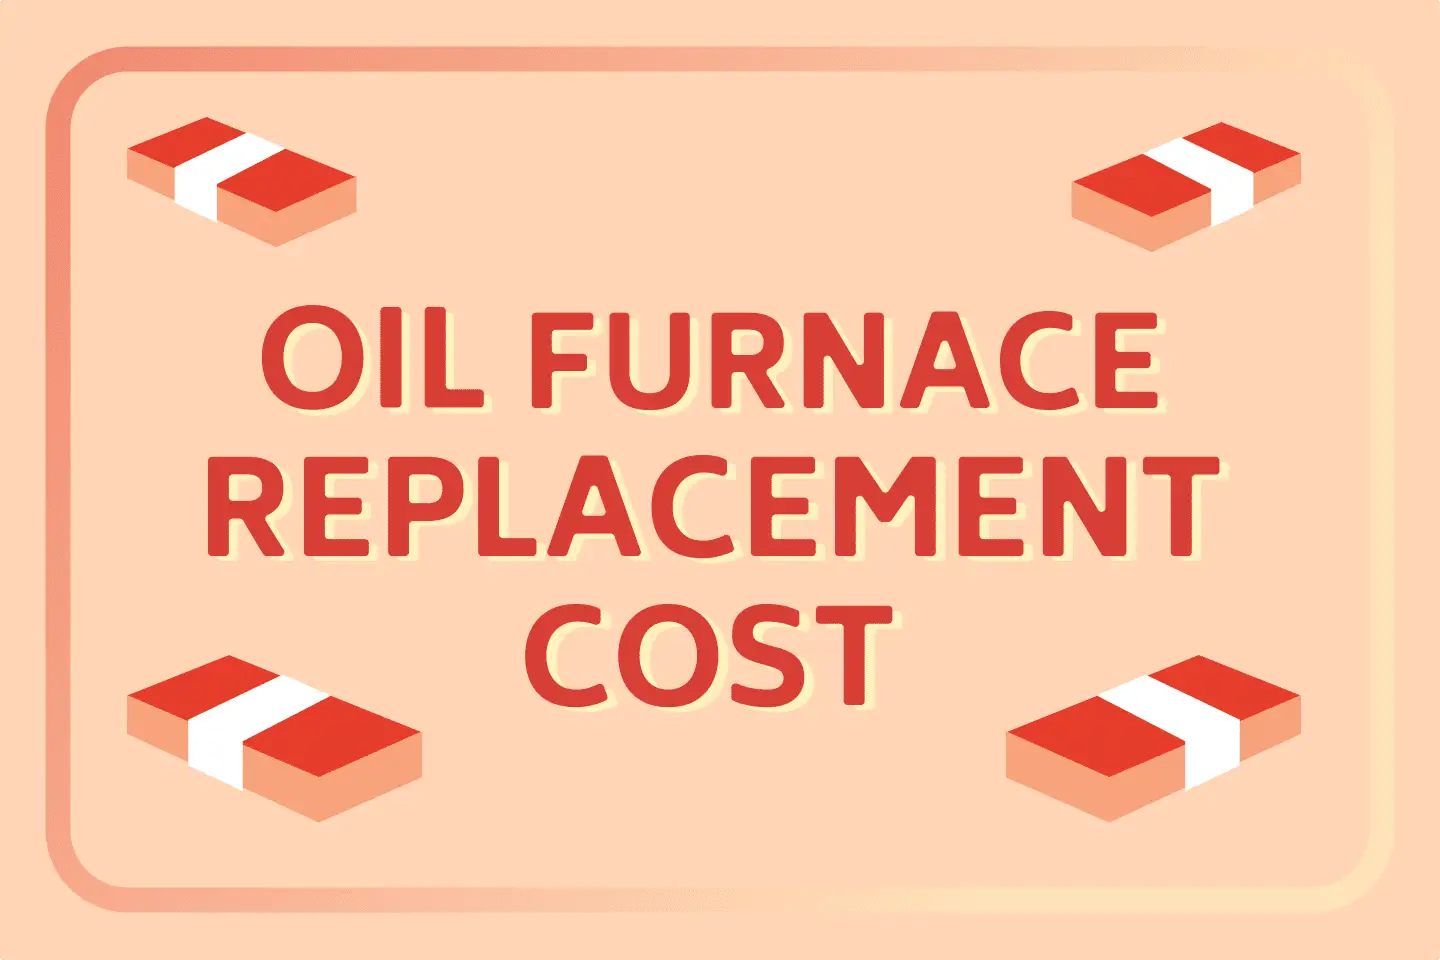 The Real Oil Furnace Replacement Cost [BREAKDOWN]